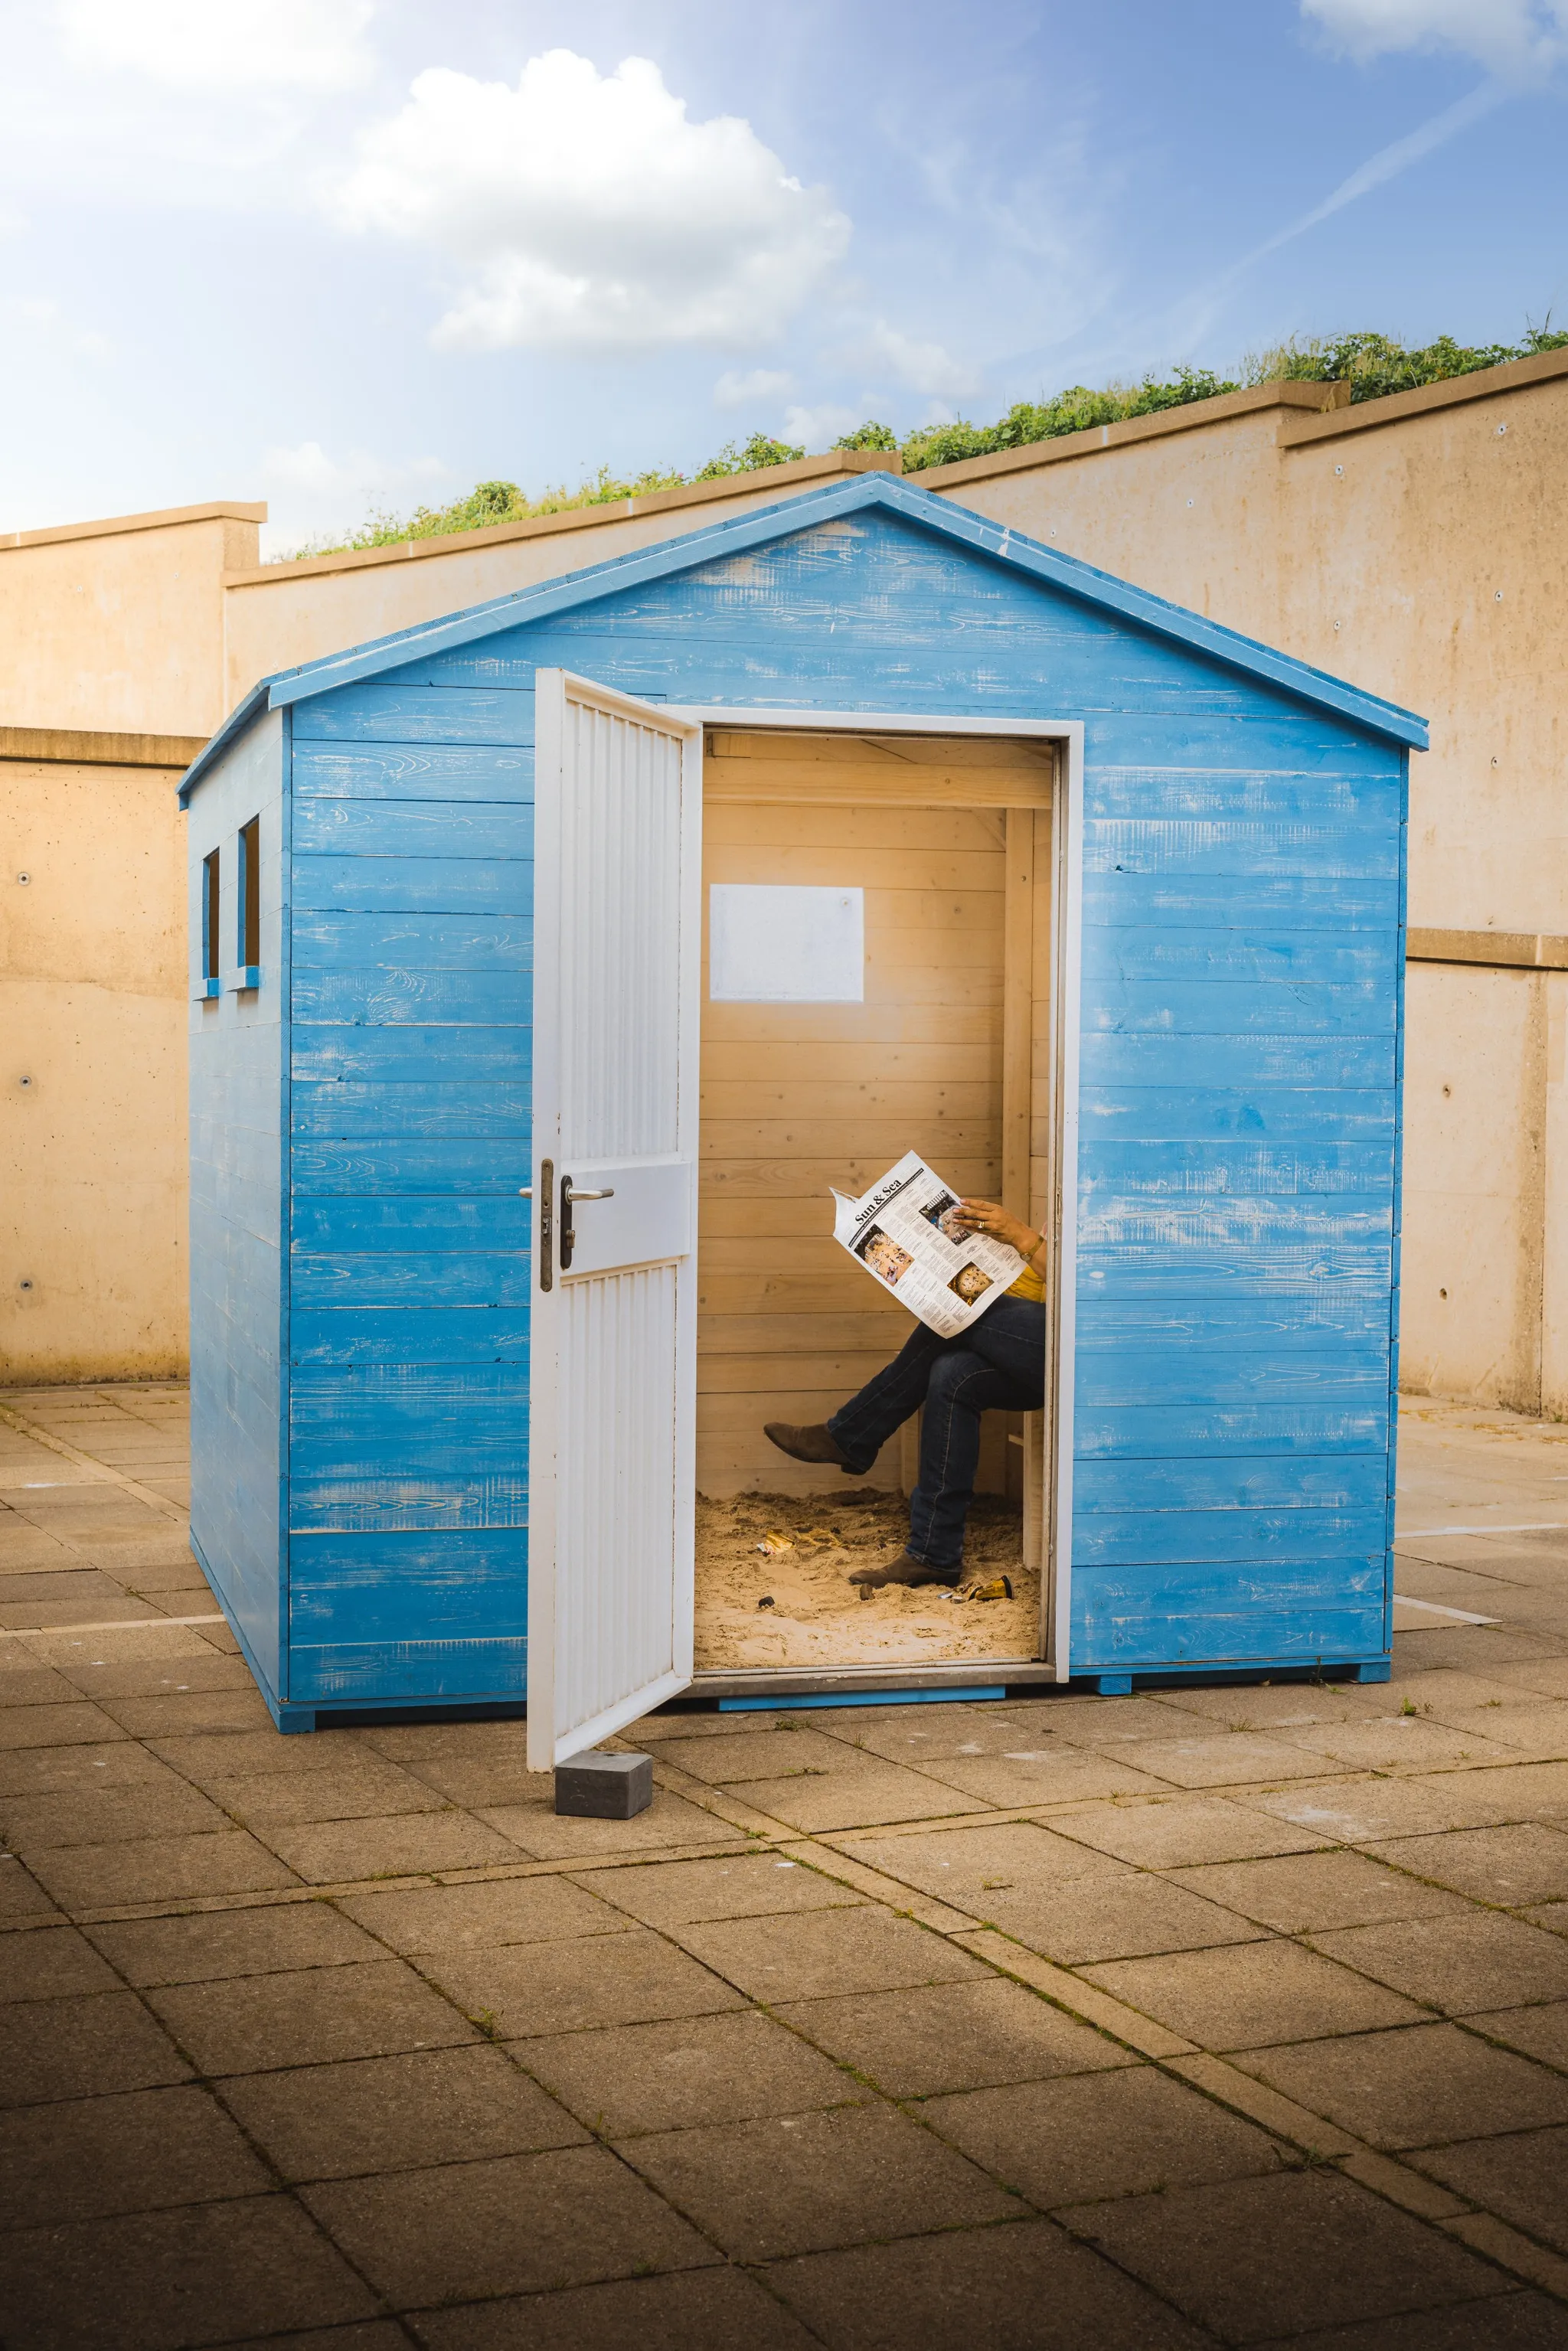 A bright blue wooden beach cabin sits on a concrete floor. Inside, a visitor reads a newspaper.